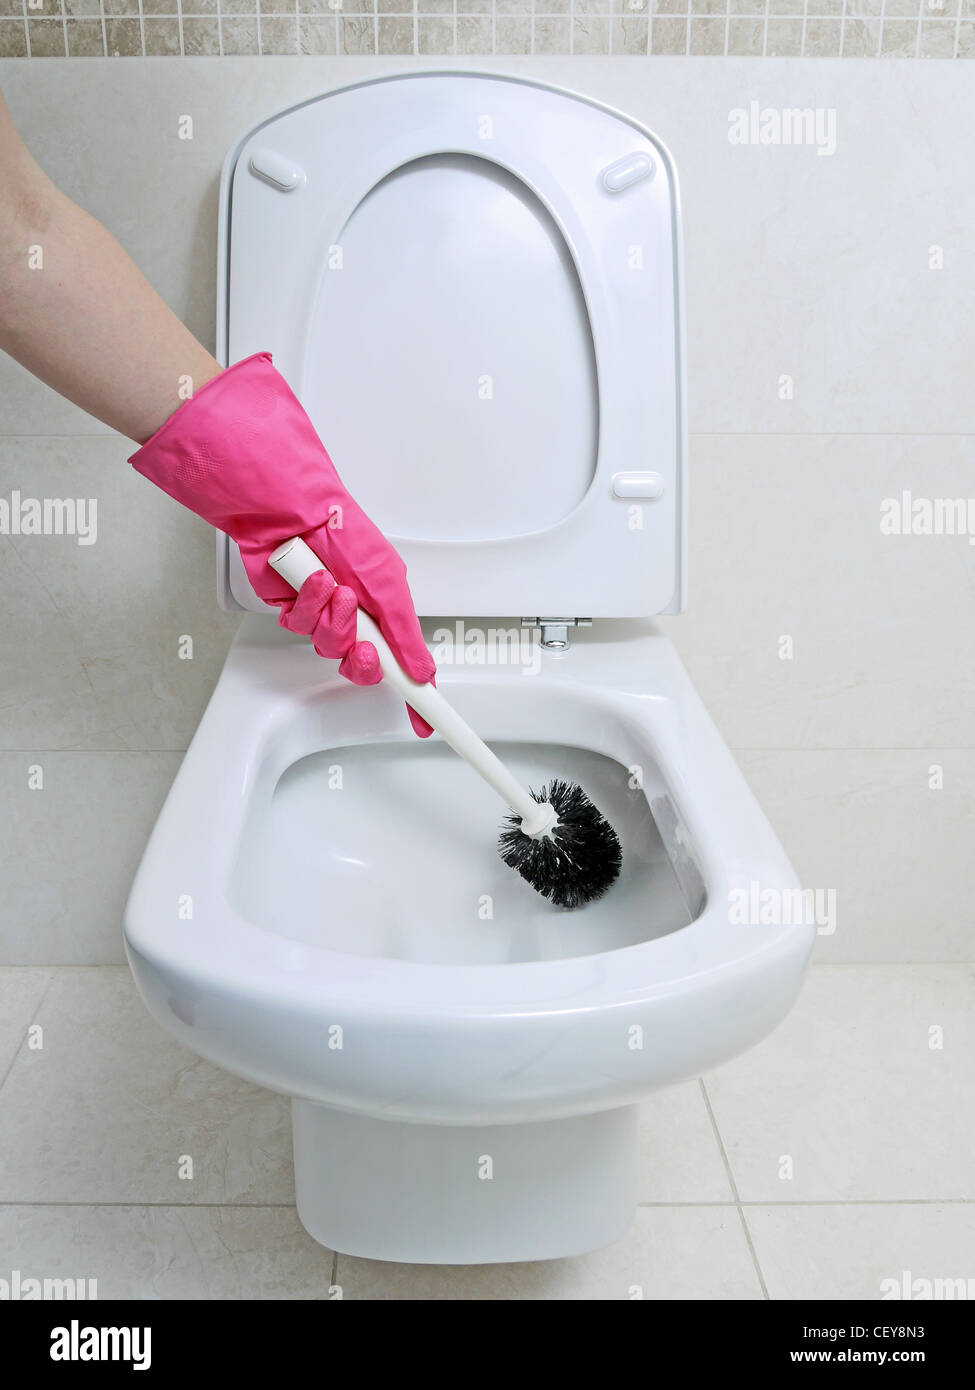 Female hand in pink rubber glove cleaning toilet bowl using brush Stock Photo